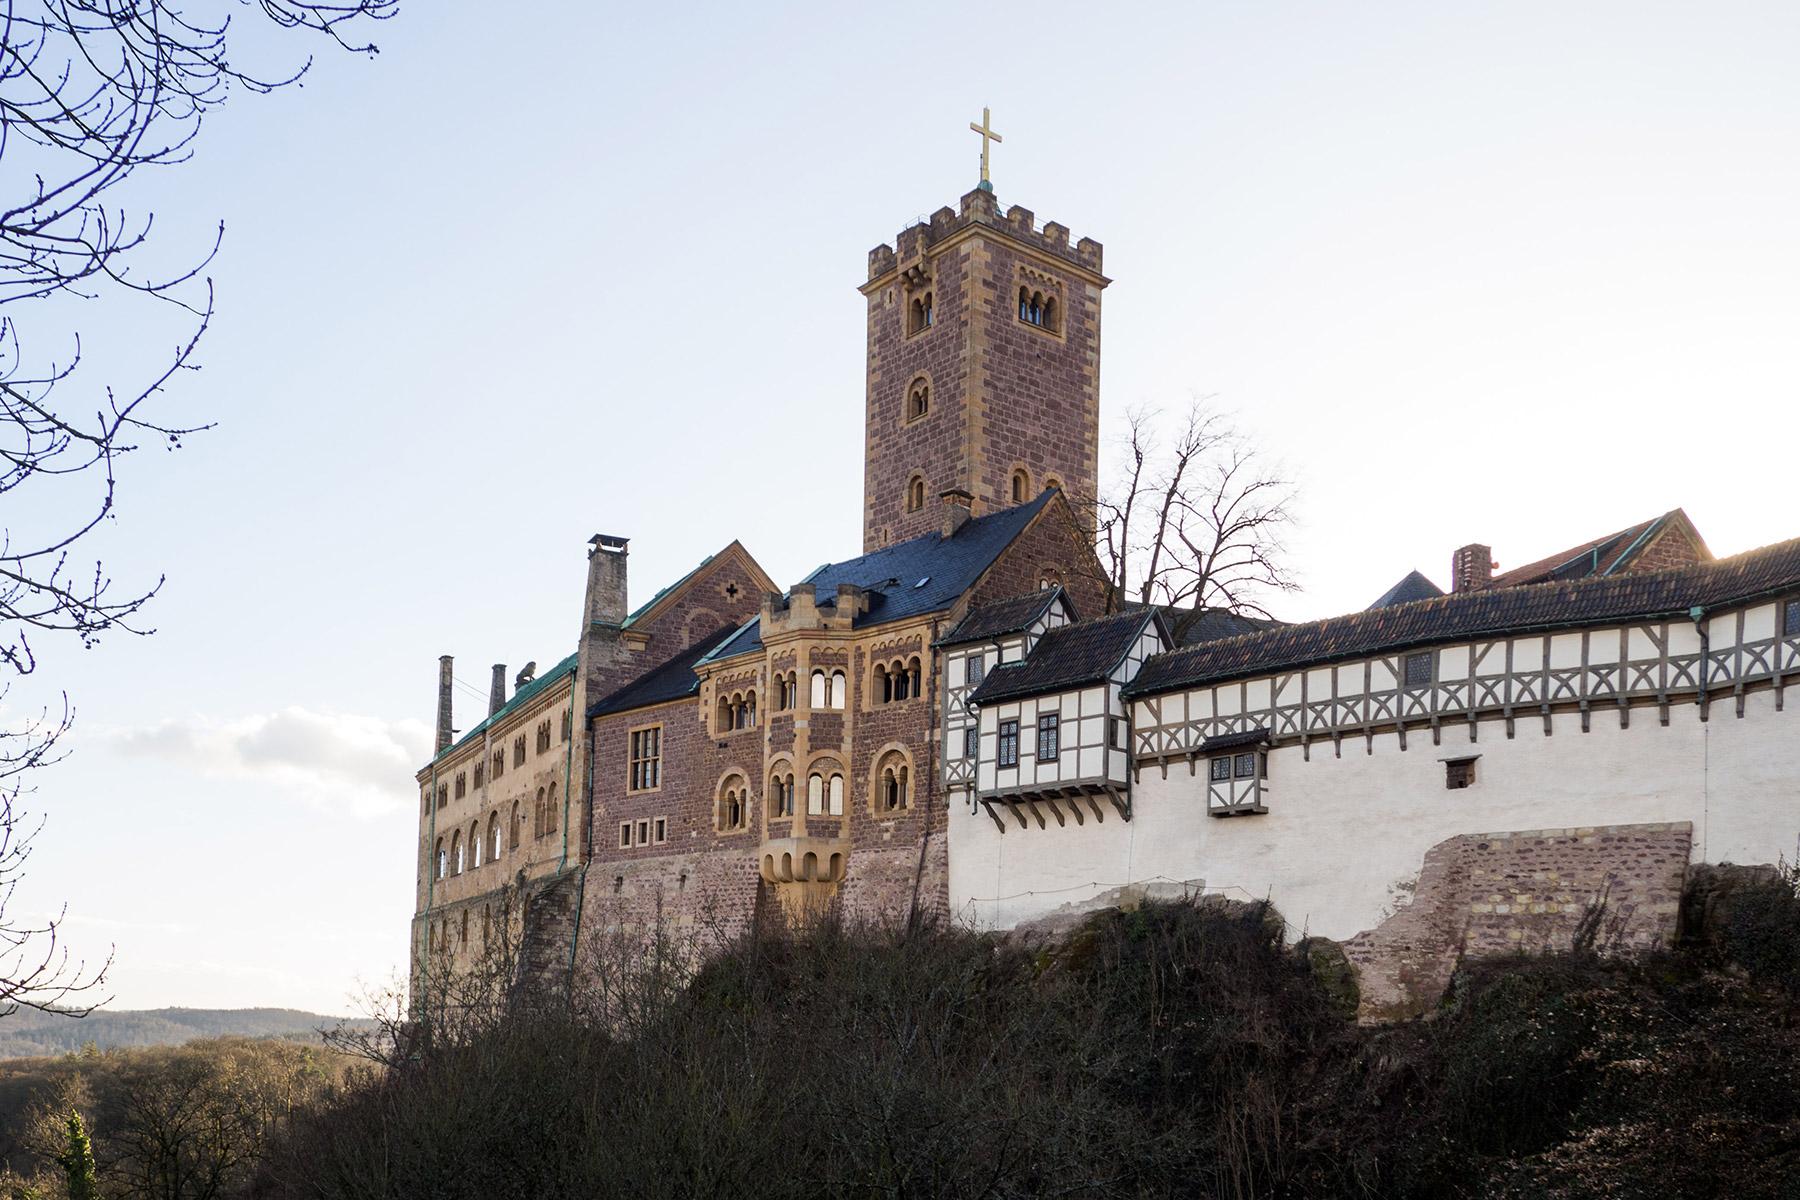 500 years ago, during his stay at Wartburg Castle, Martin Luther translated the New Testament into German. Photo: Wim van 't Einde, Unsplash 